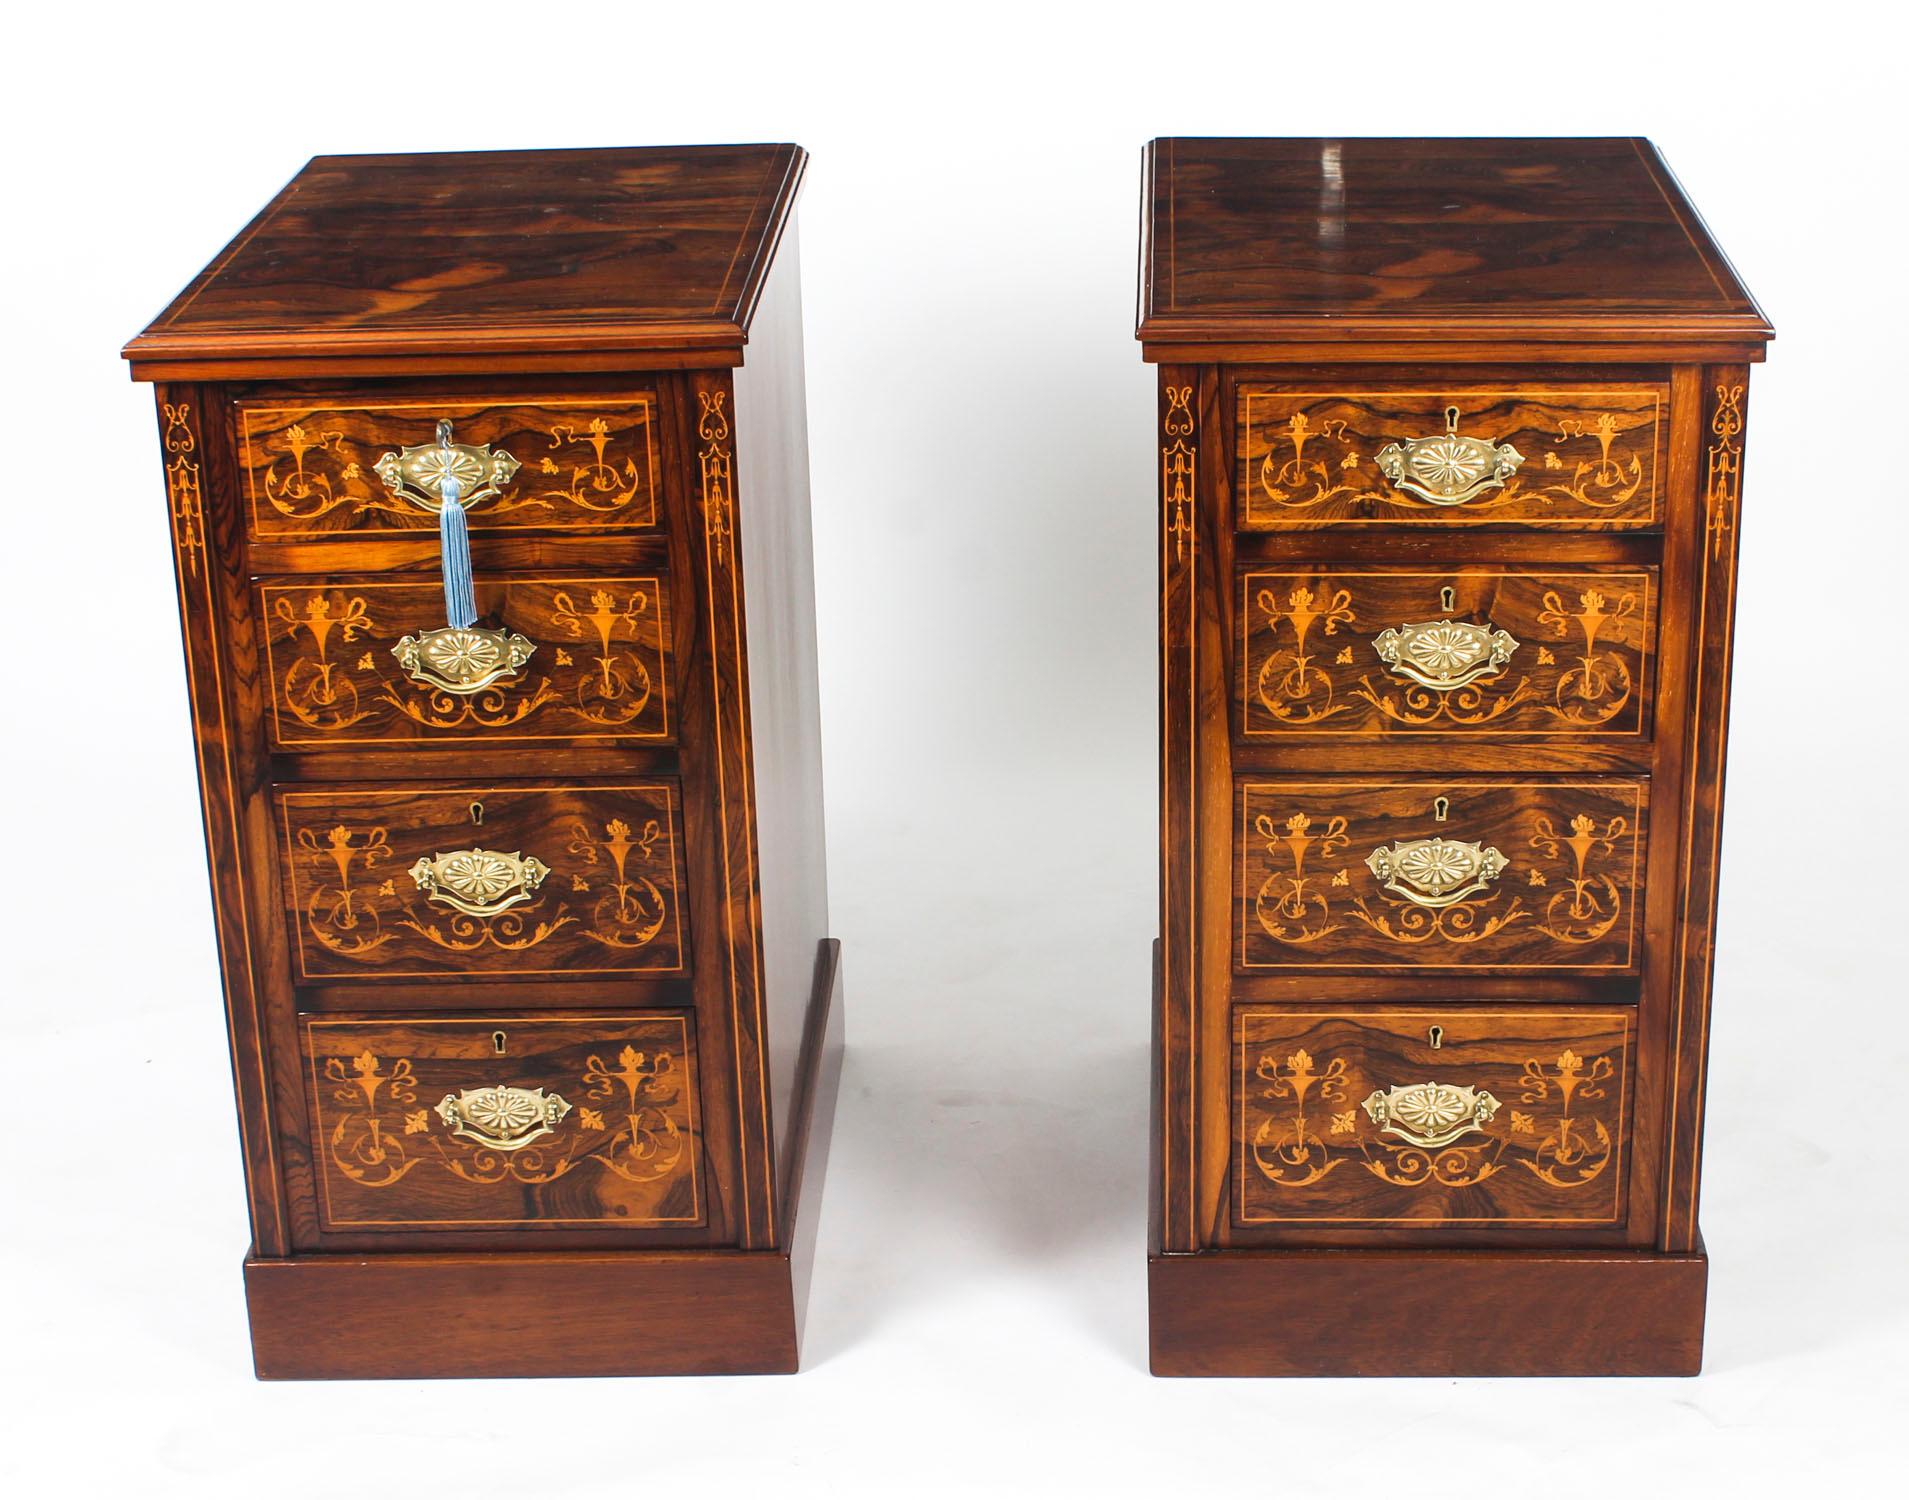 This is a stunning pair of Antique Edwardian English Gonçalo Alves and marquetry bedside chests, circa 1890 in date.

They are crafted from solid mahogany which has been veneered in the most beautiful Gonçalo Alves. They feature exquisite boxwood